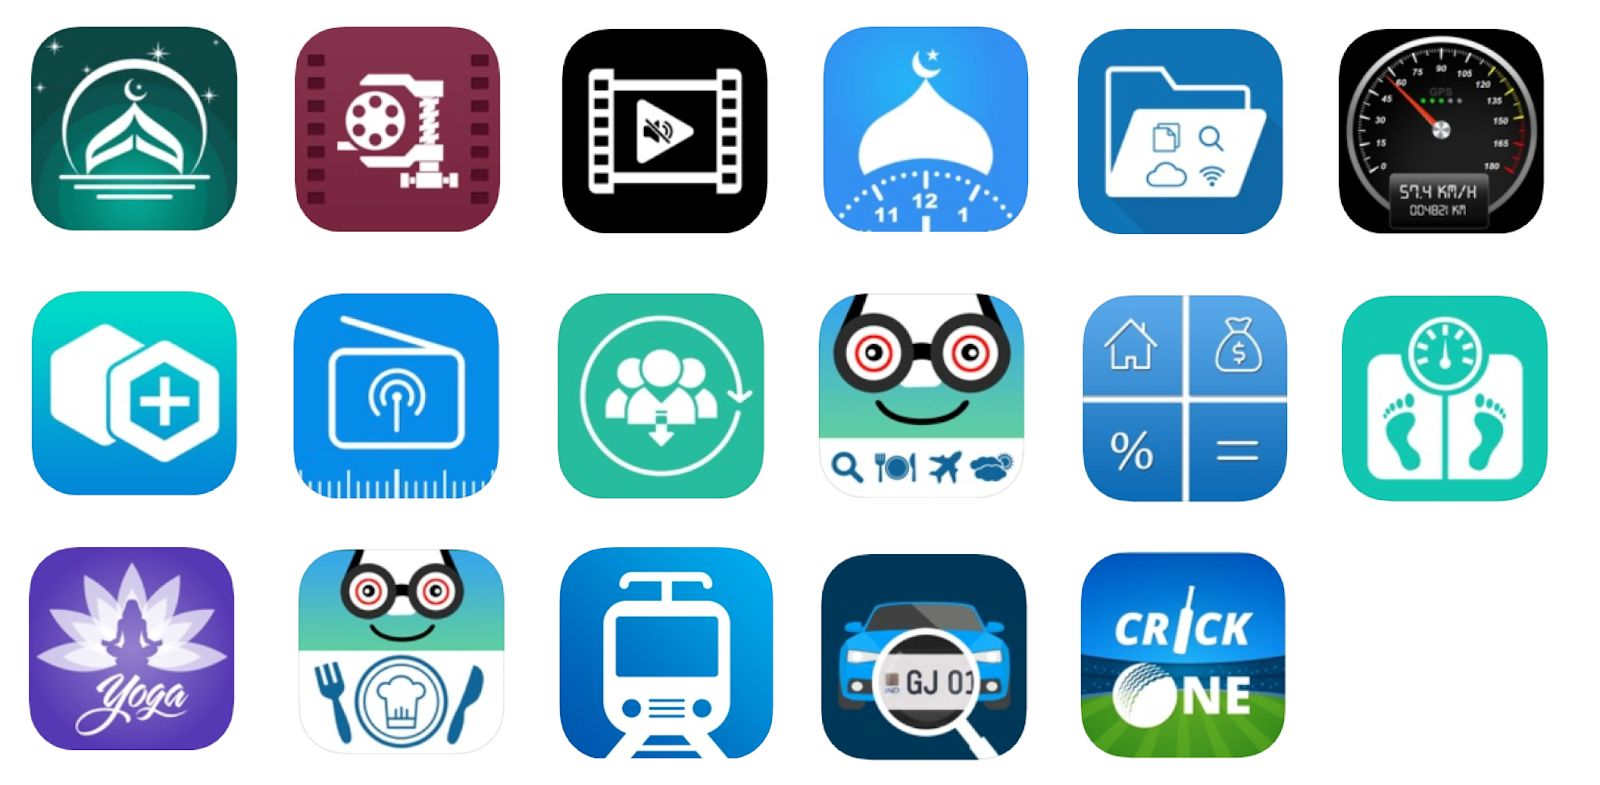 The infected apps' icons